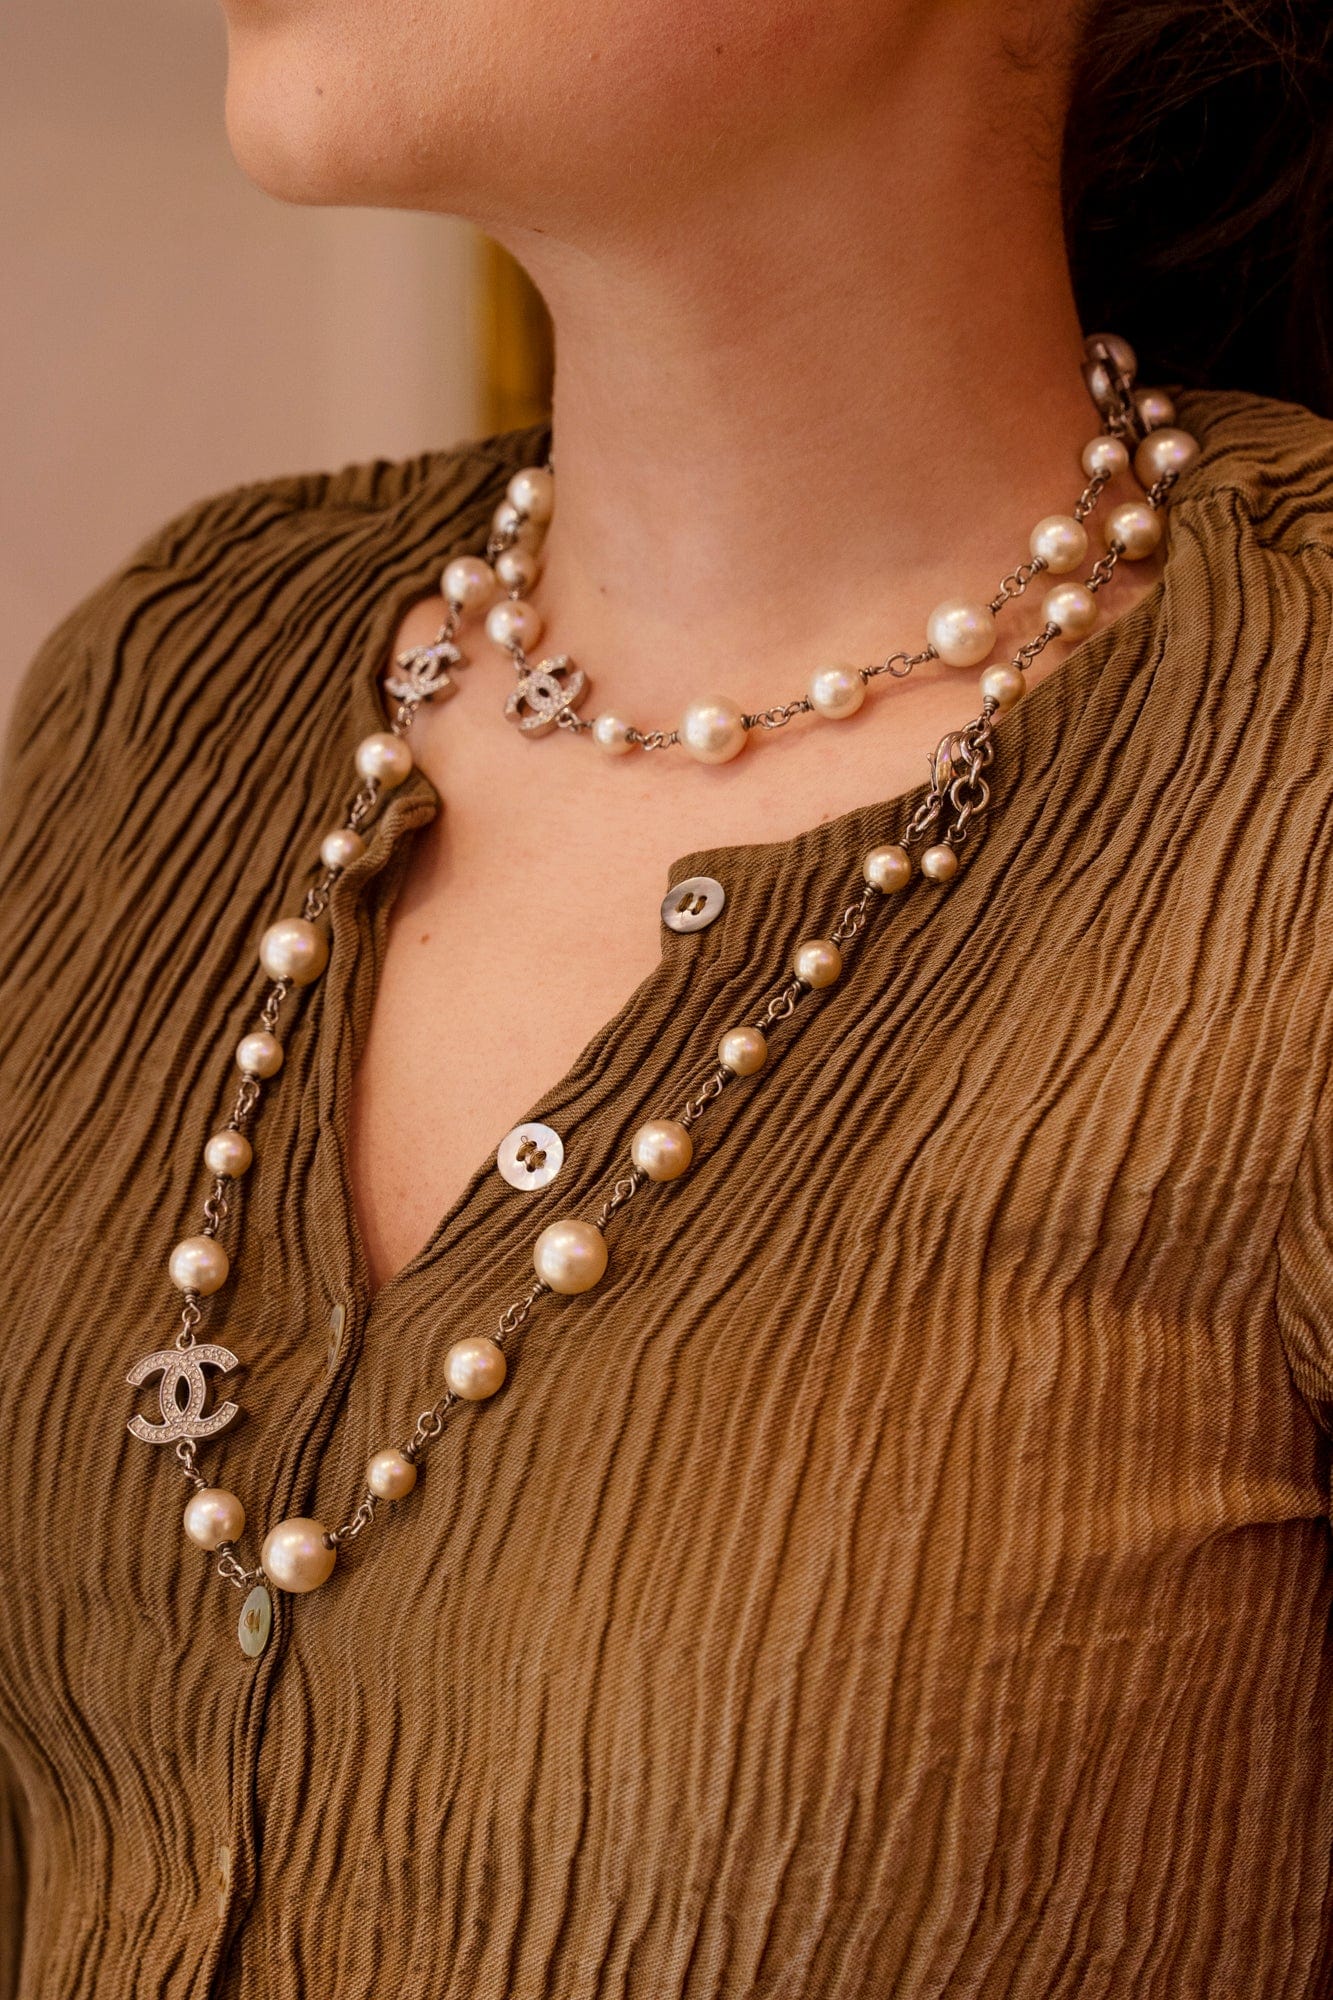 Chanel Chanel pearl necklace with CC logos - AEL1027